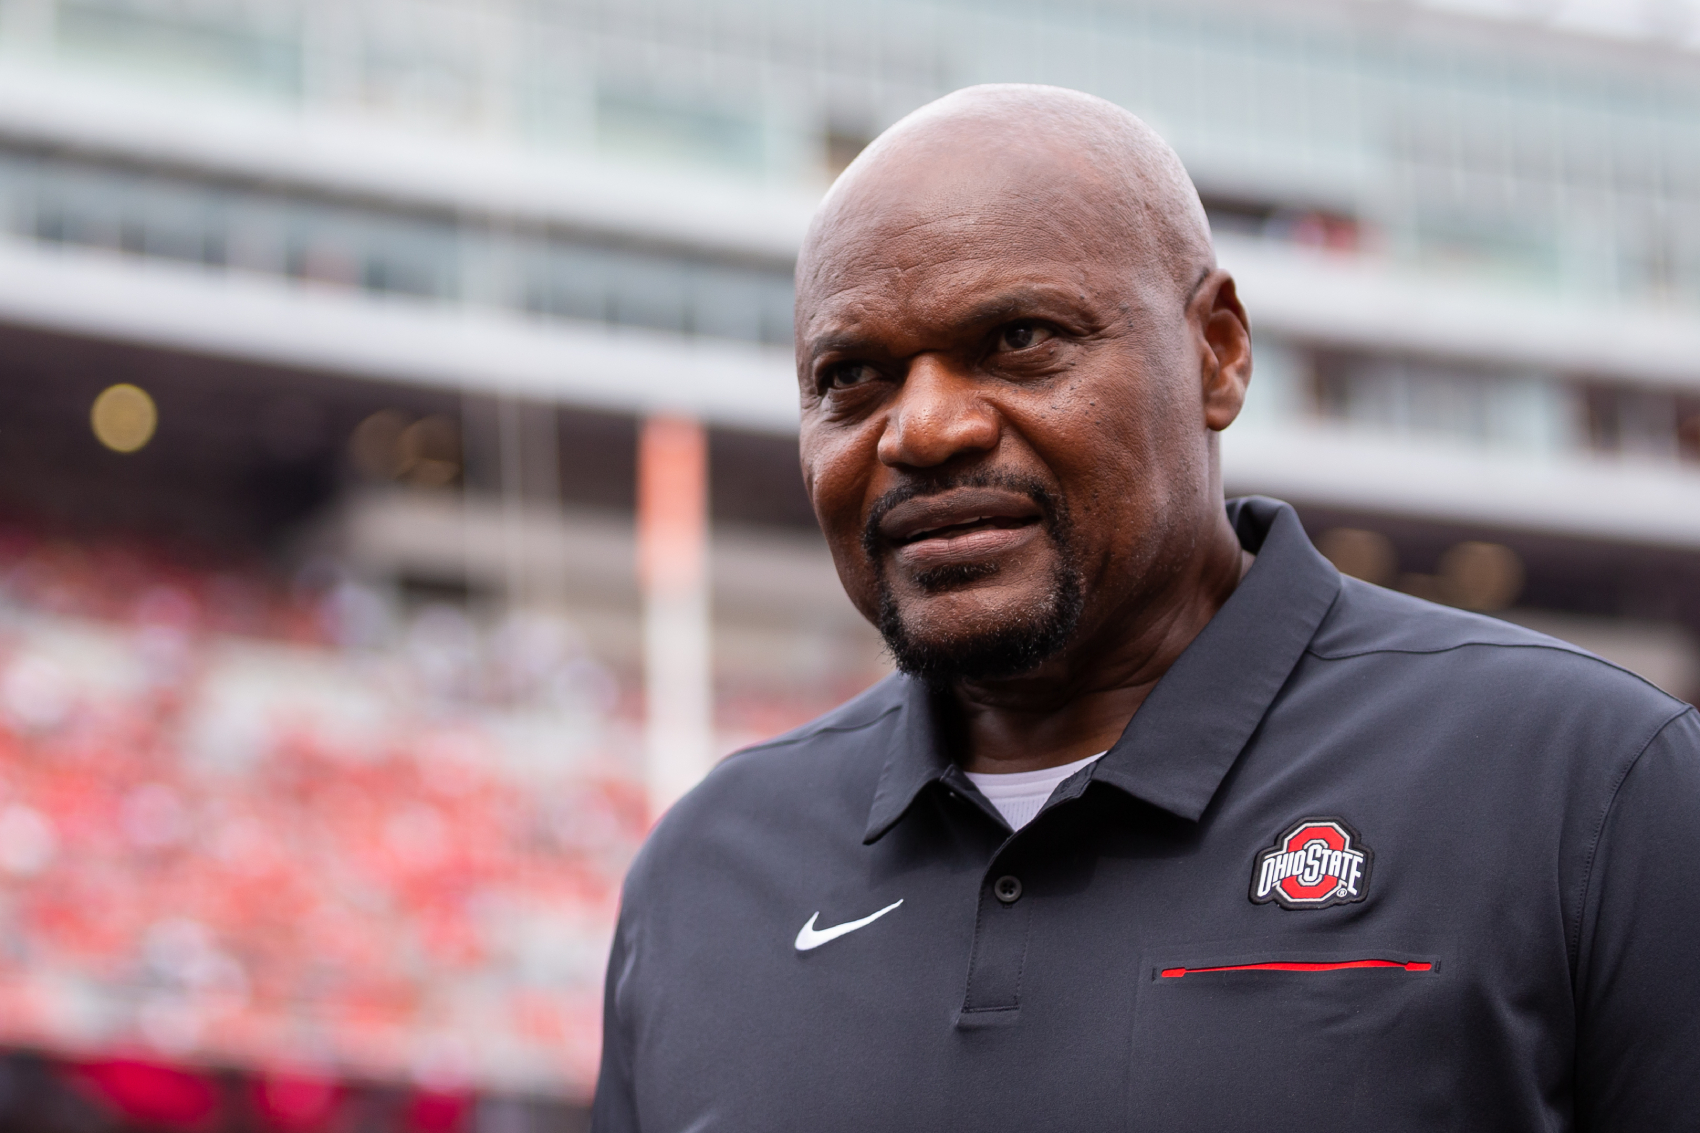 The Ohio State Buckeyes are one of the top college football programs in the country. Larry Johnson Sr. has been a reason why, too.